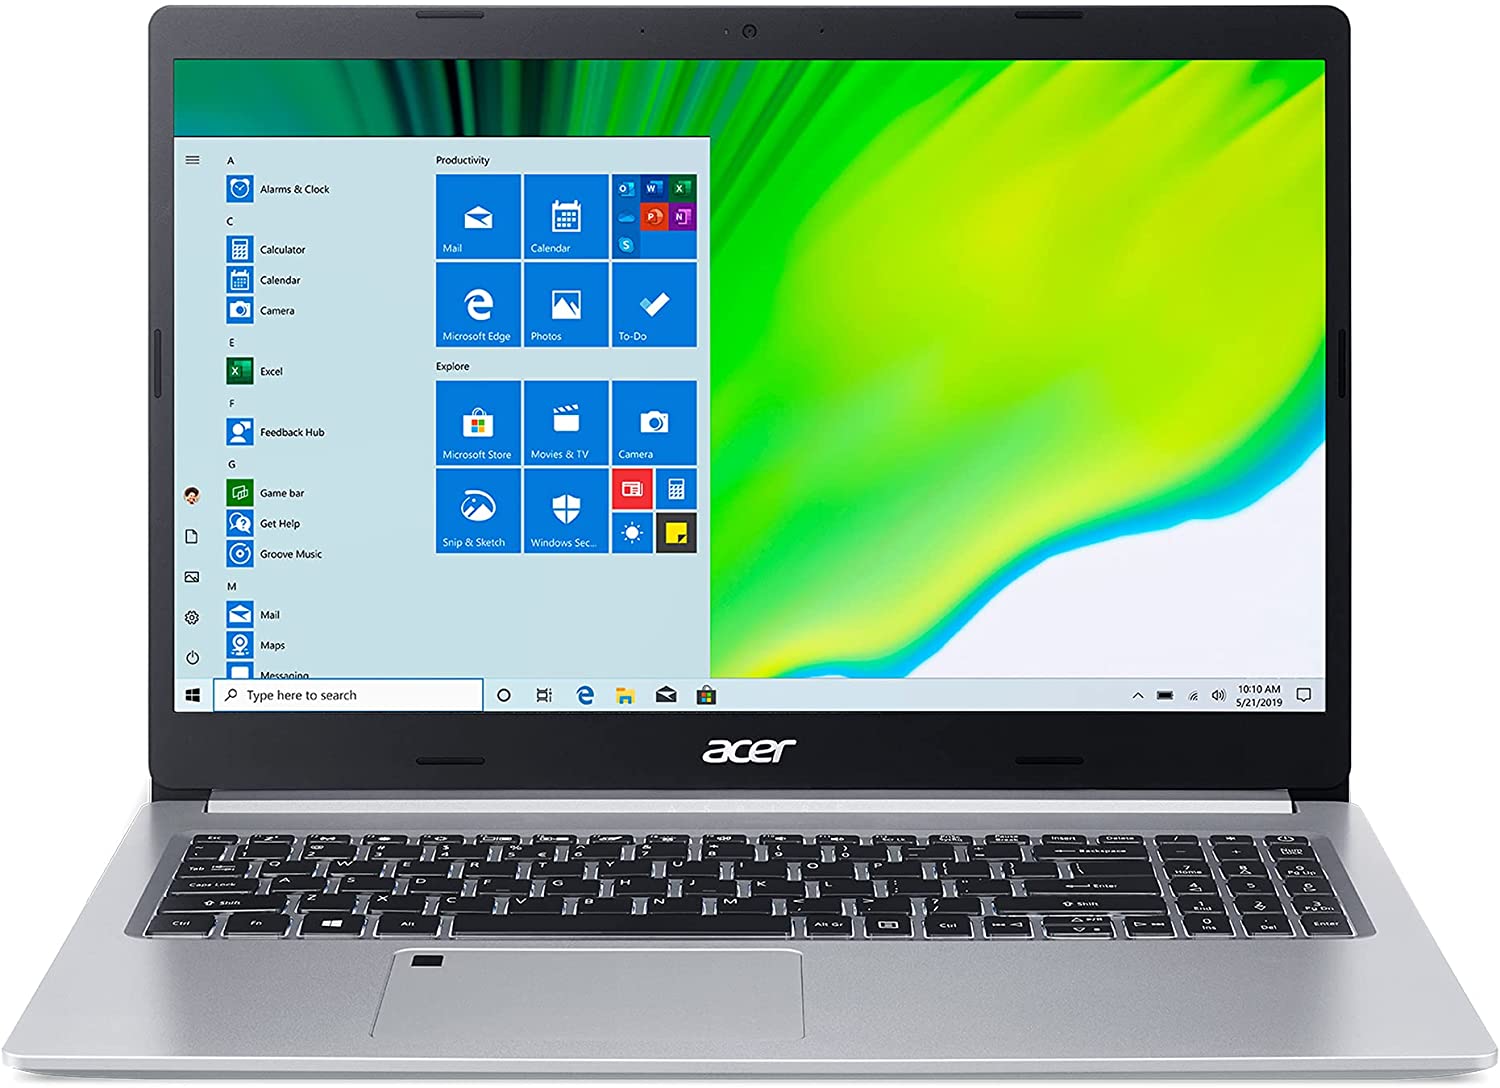 Acer Acer Store